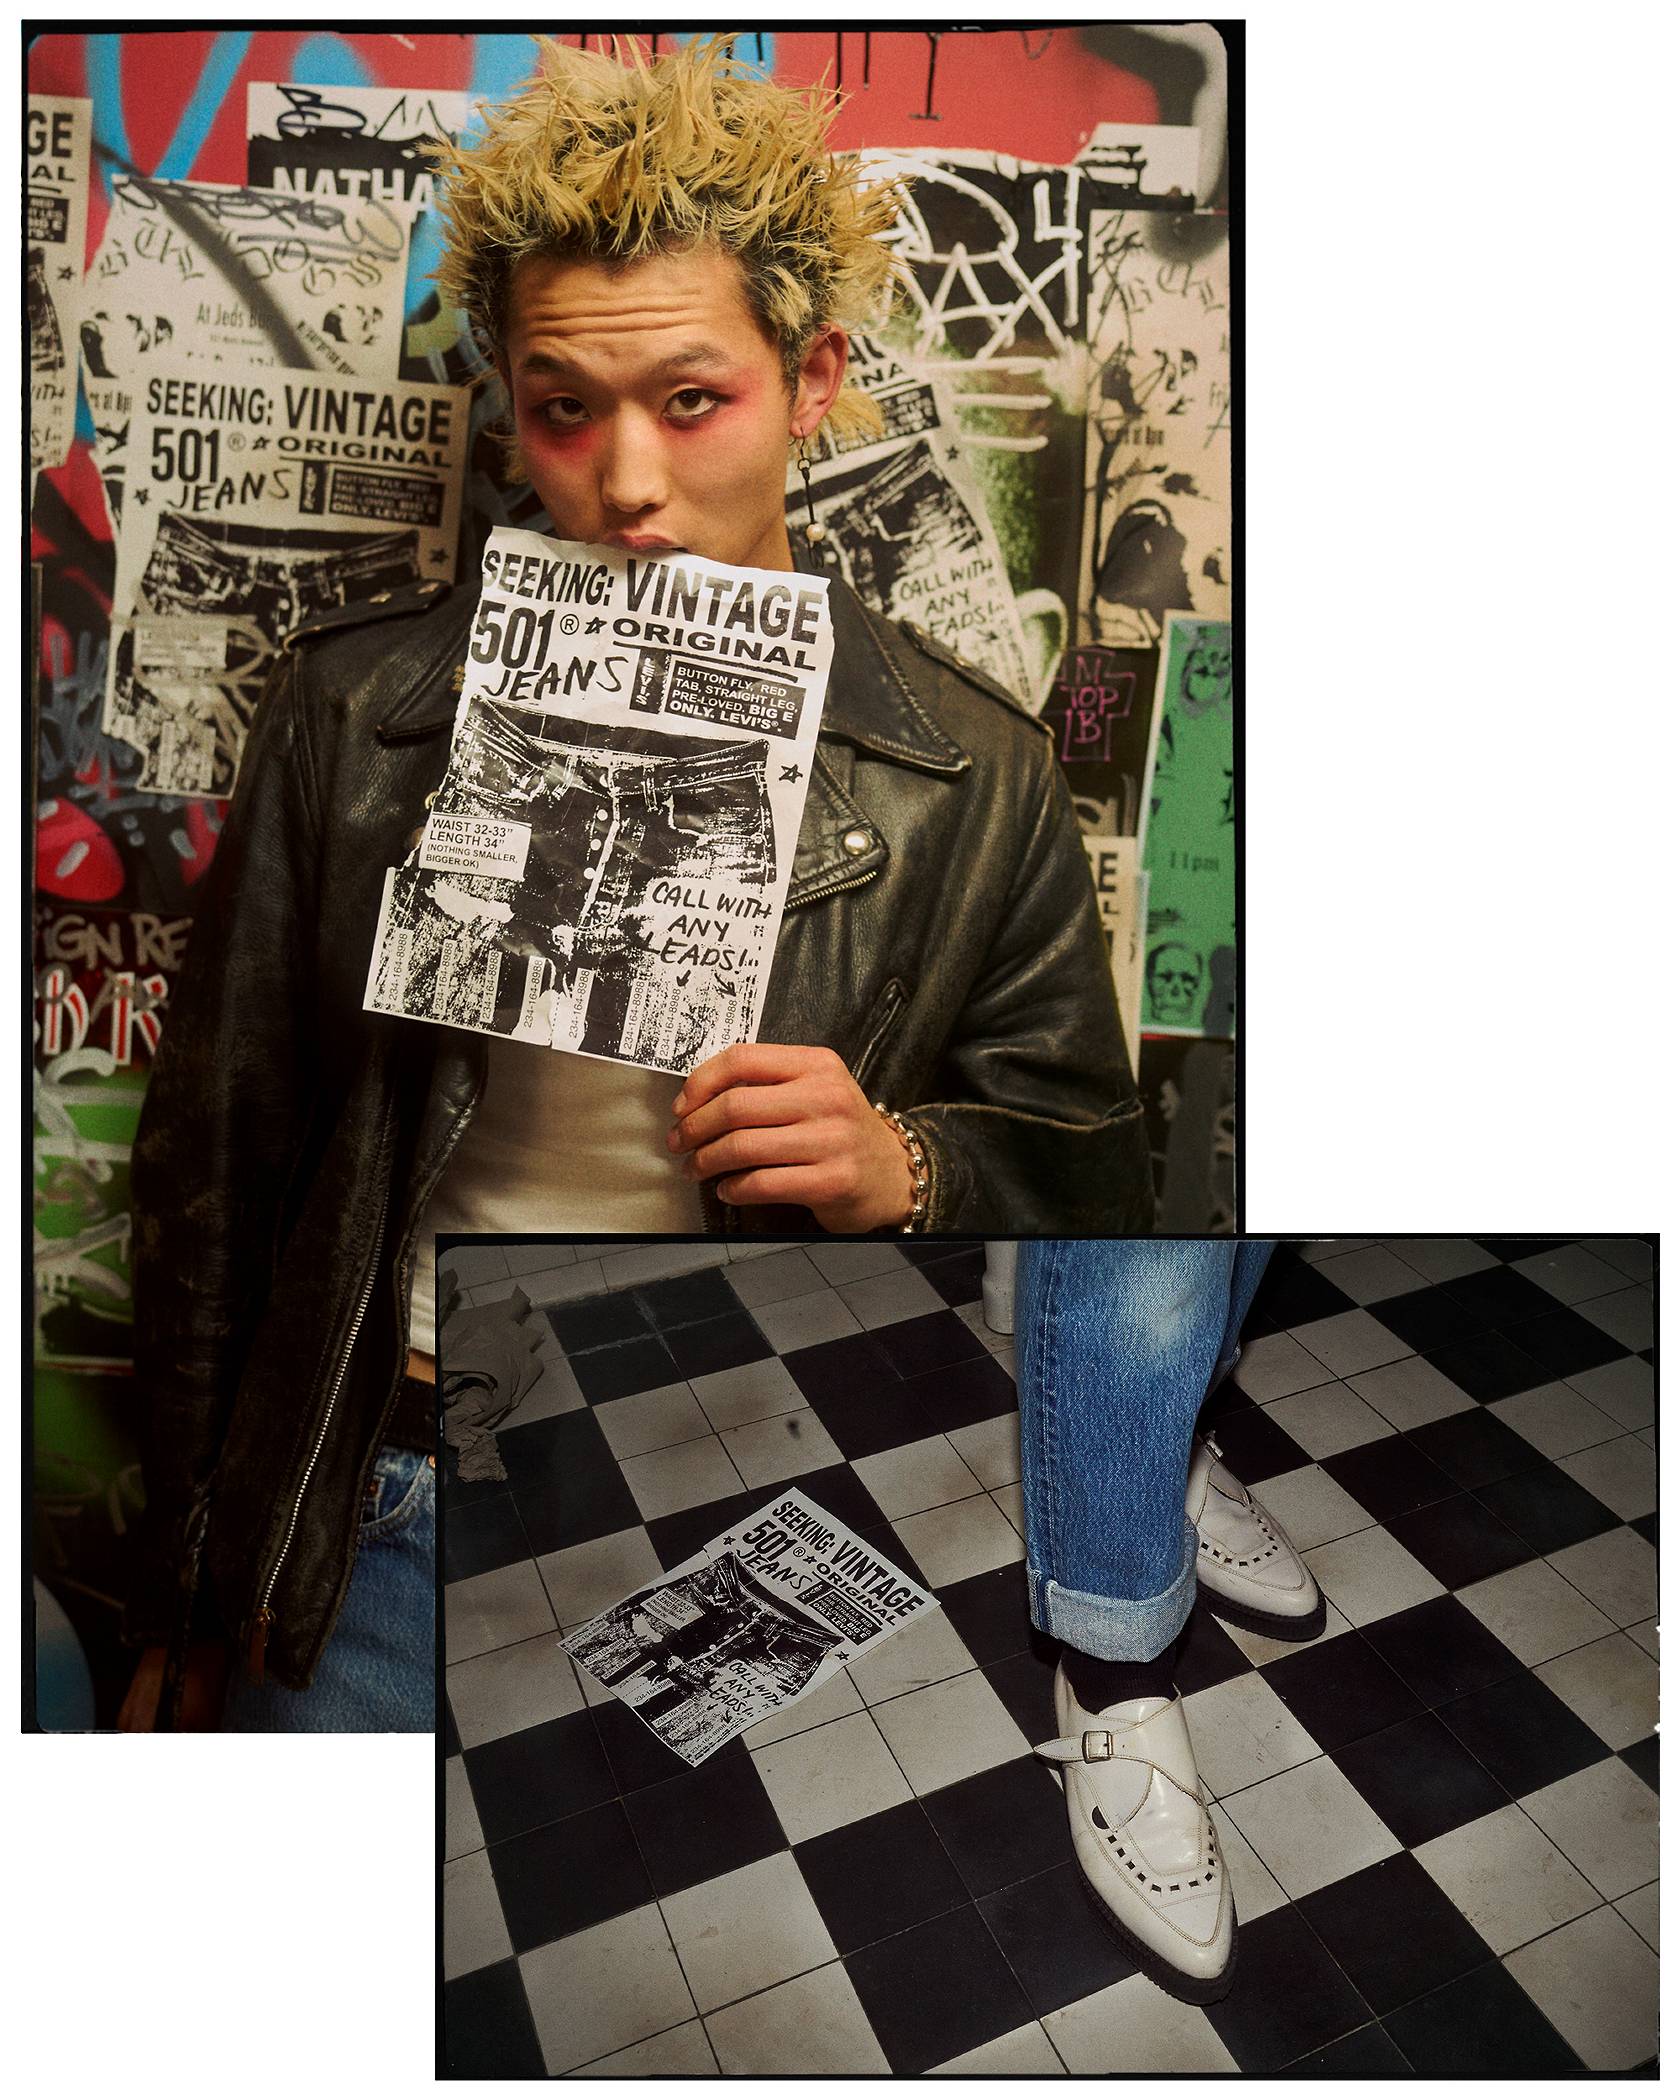 Guy with spikey blond hair wearing a leather jacket, white top, and Levi's jeans. He has a wanted ad for Levi's vintage jeans in his mouth standing in front of a graffiti wall.